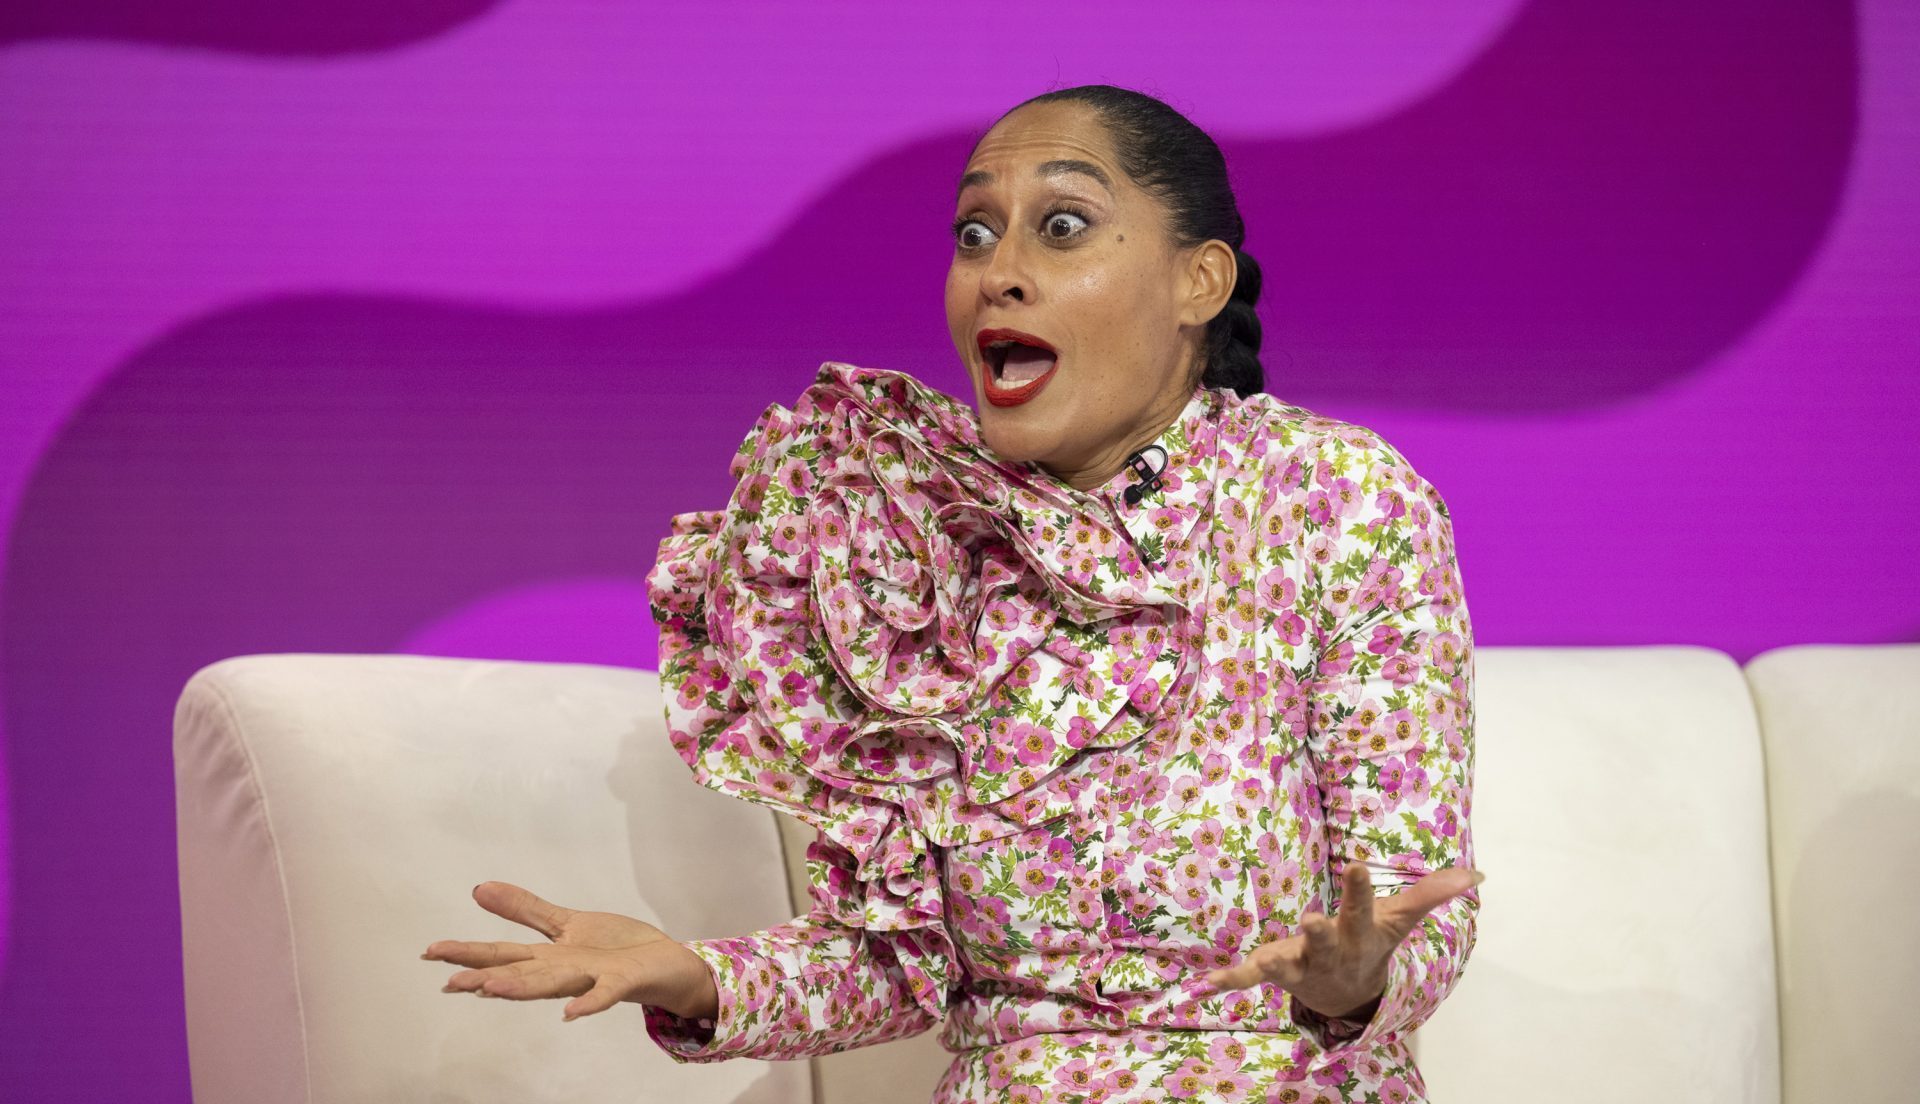 Tracee Ellis Ross Dishes On All The HOT Black Men She Saw While Traveling: "I Love A Black Man"